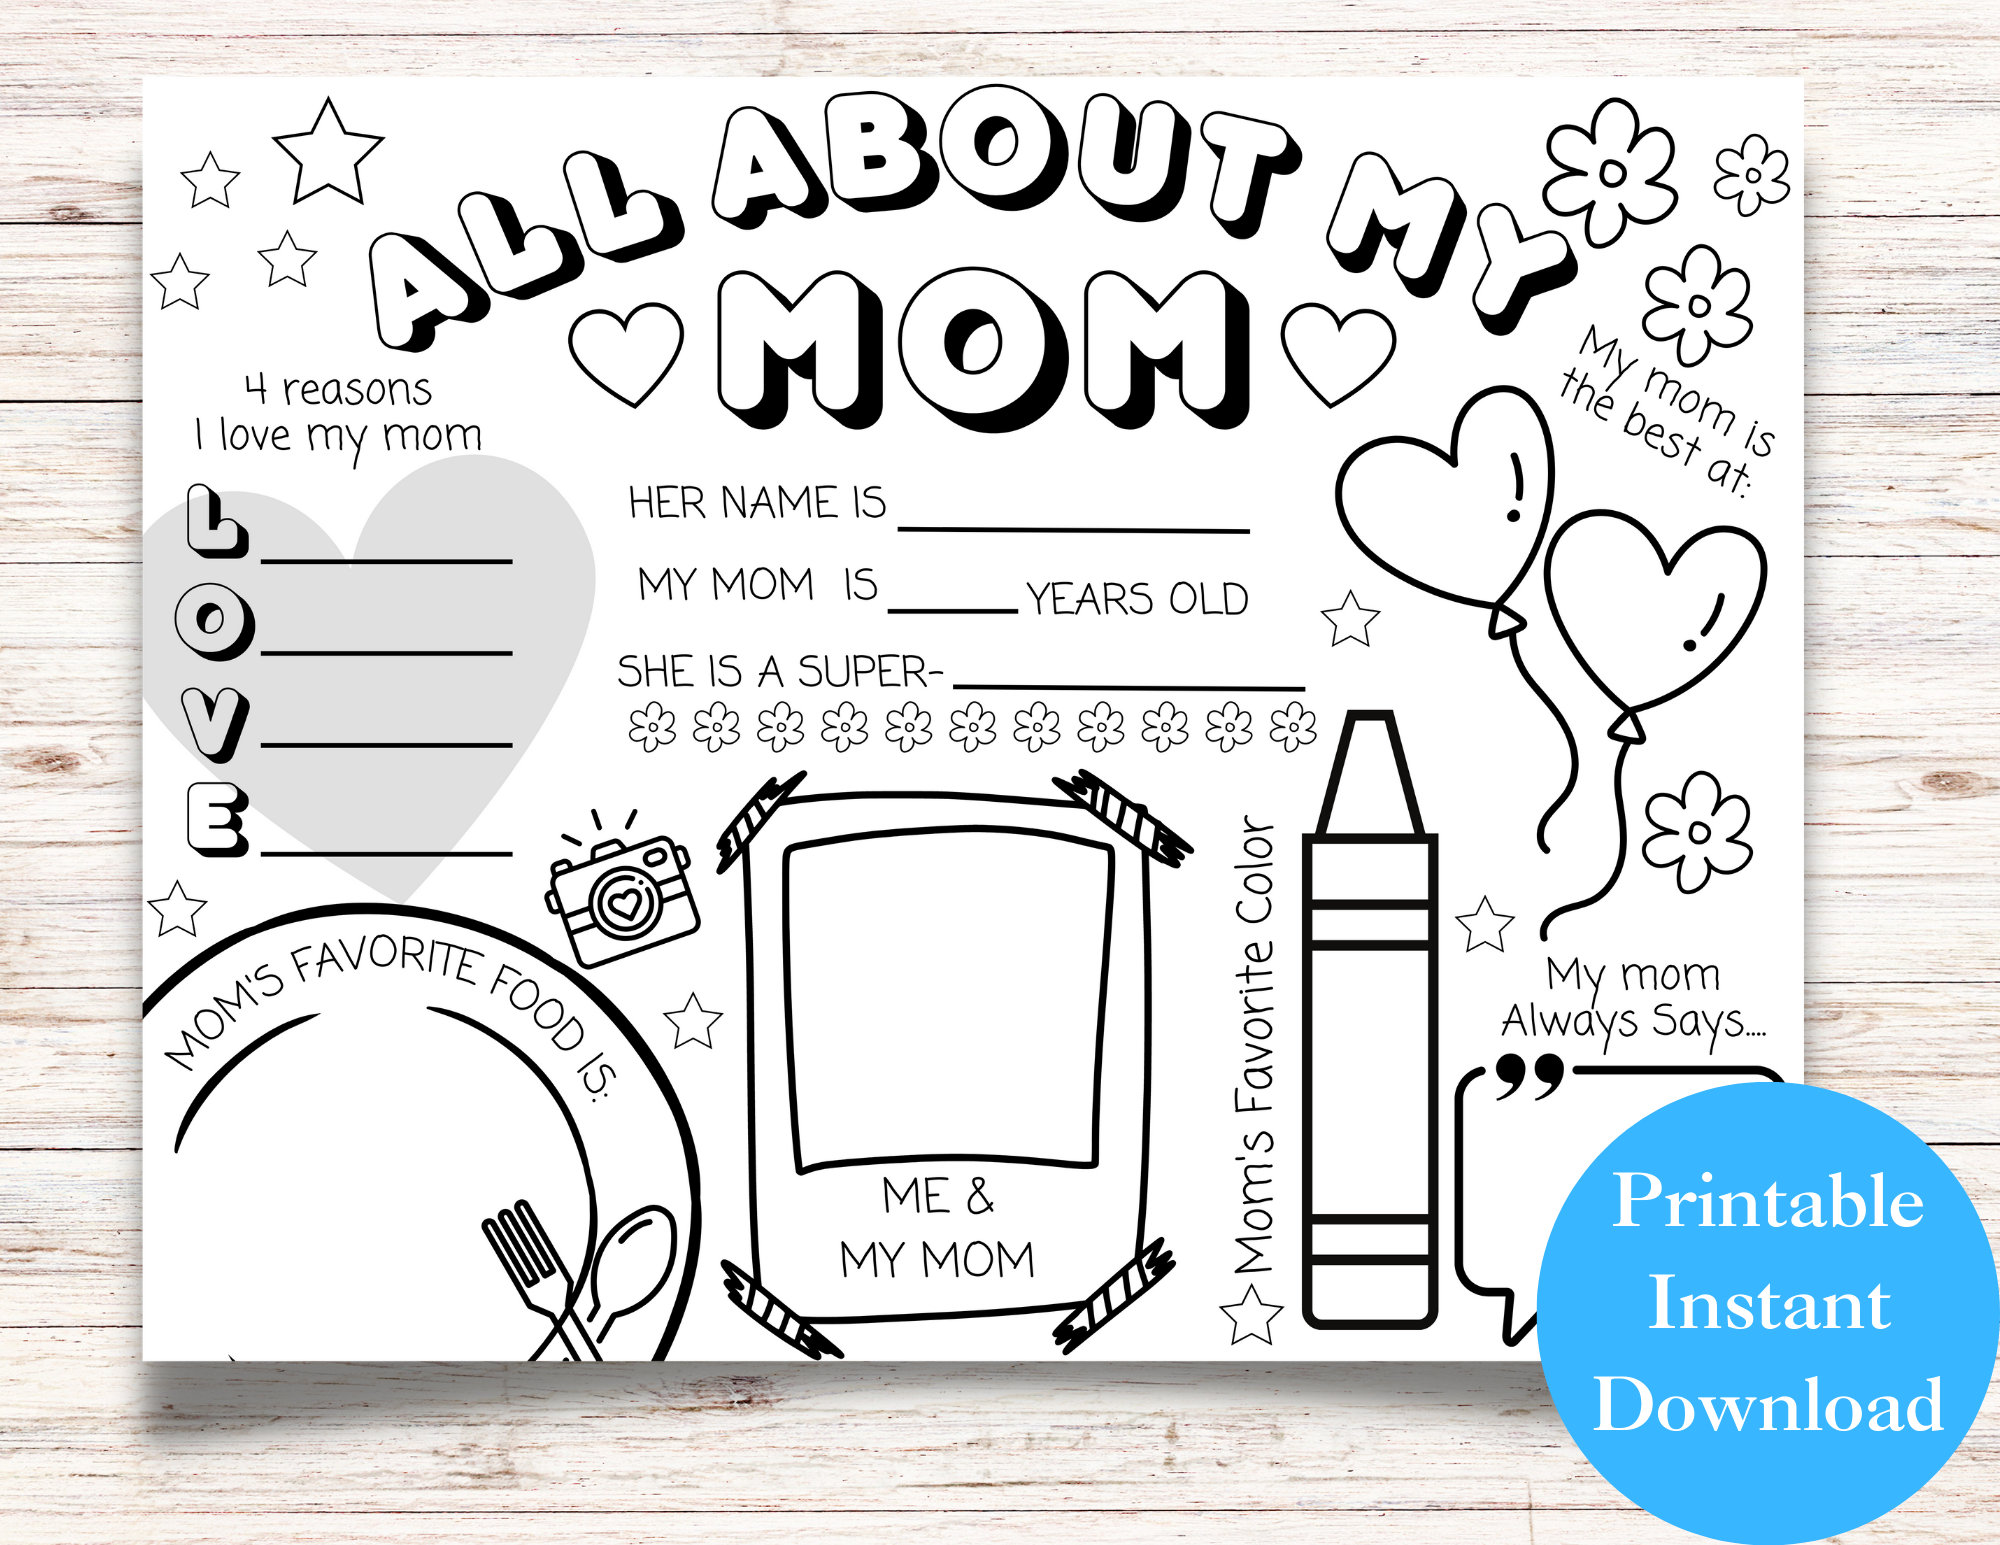 All about my mom printable mothers day craft mothers day coloring page gift for mom from kids kids gift for grandma grandmother nana